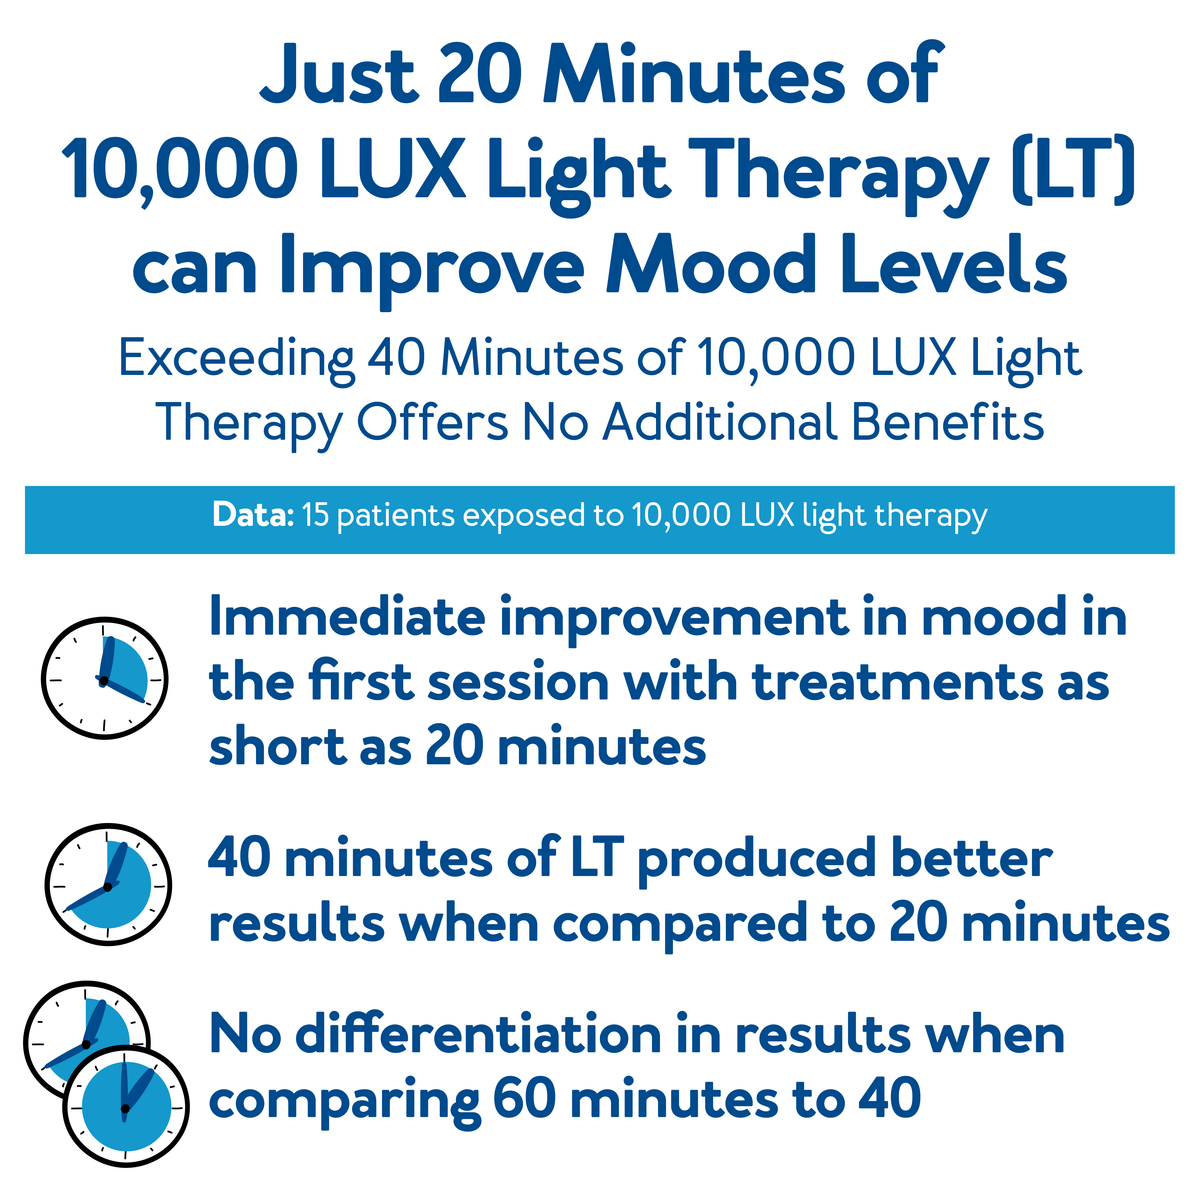 Just 20 minutes of 10,000 LUX light therapy (LT) can improve mood levels, further details are provided below.